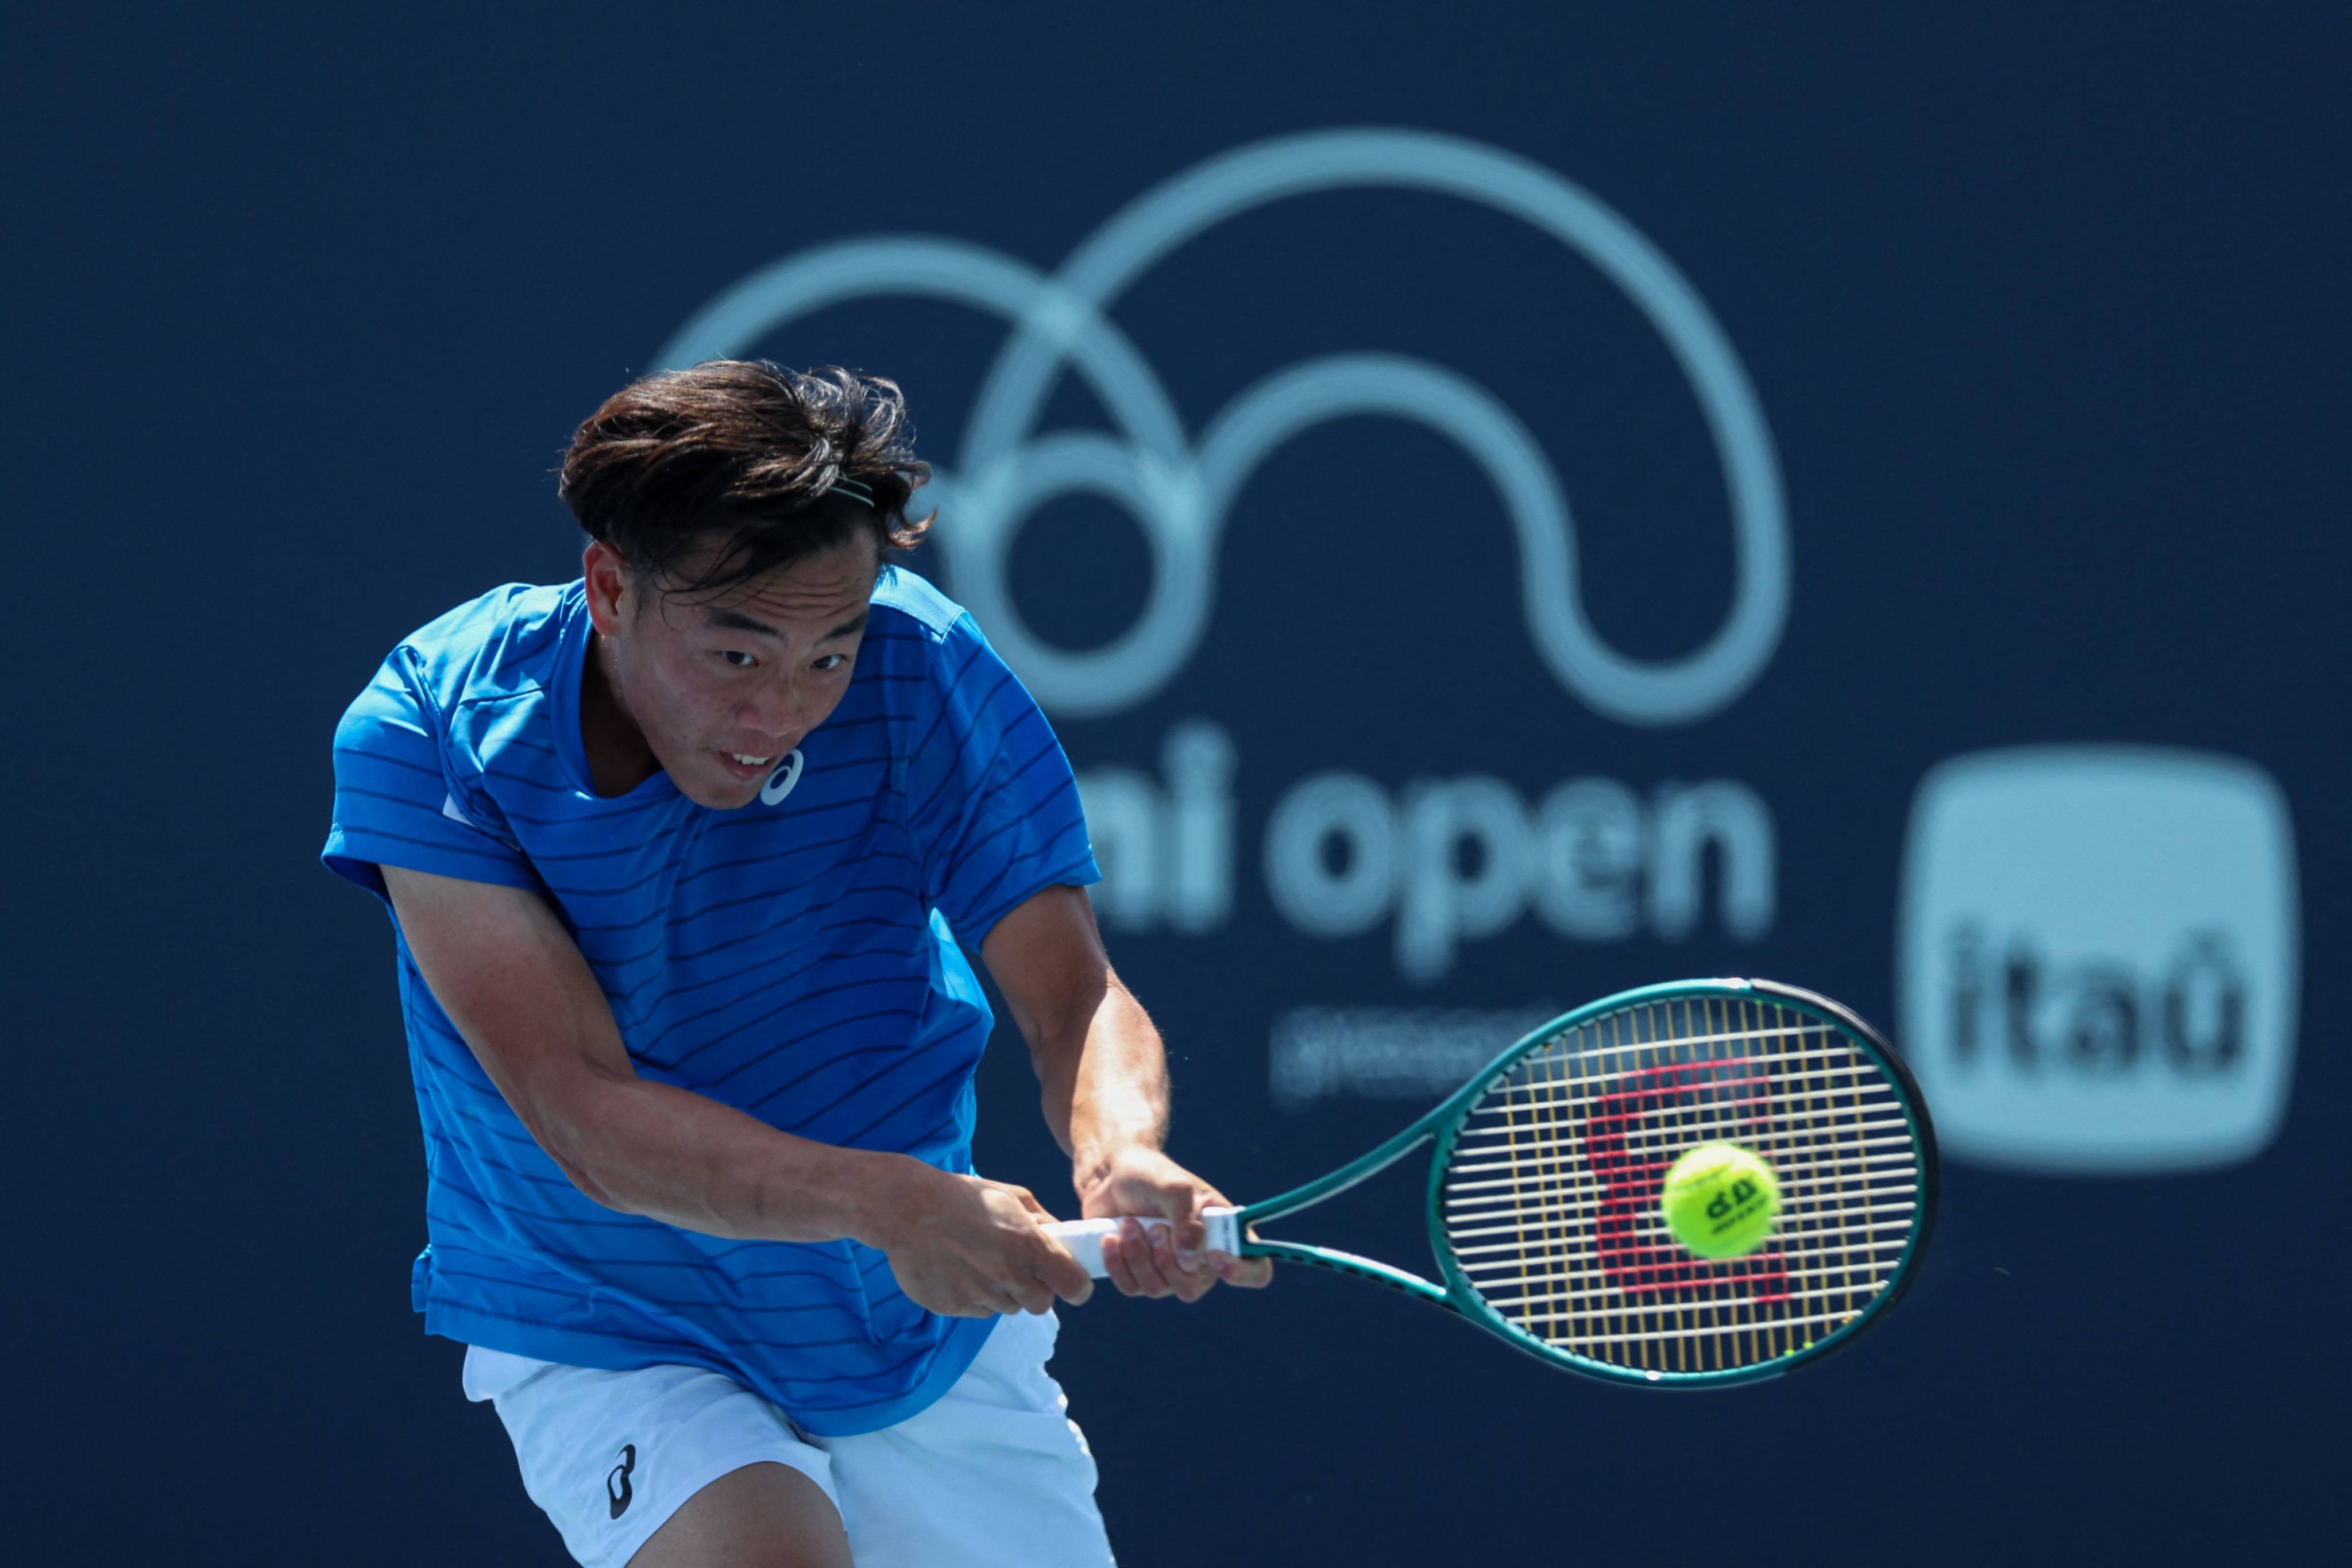 Coleman Wong returns a shot from Sumit Nagal during his men’s singles qualifying match at Hard Rock Stadium. Photo: Getty Images